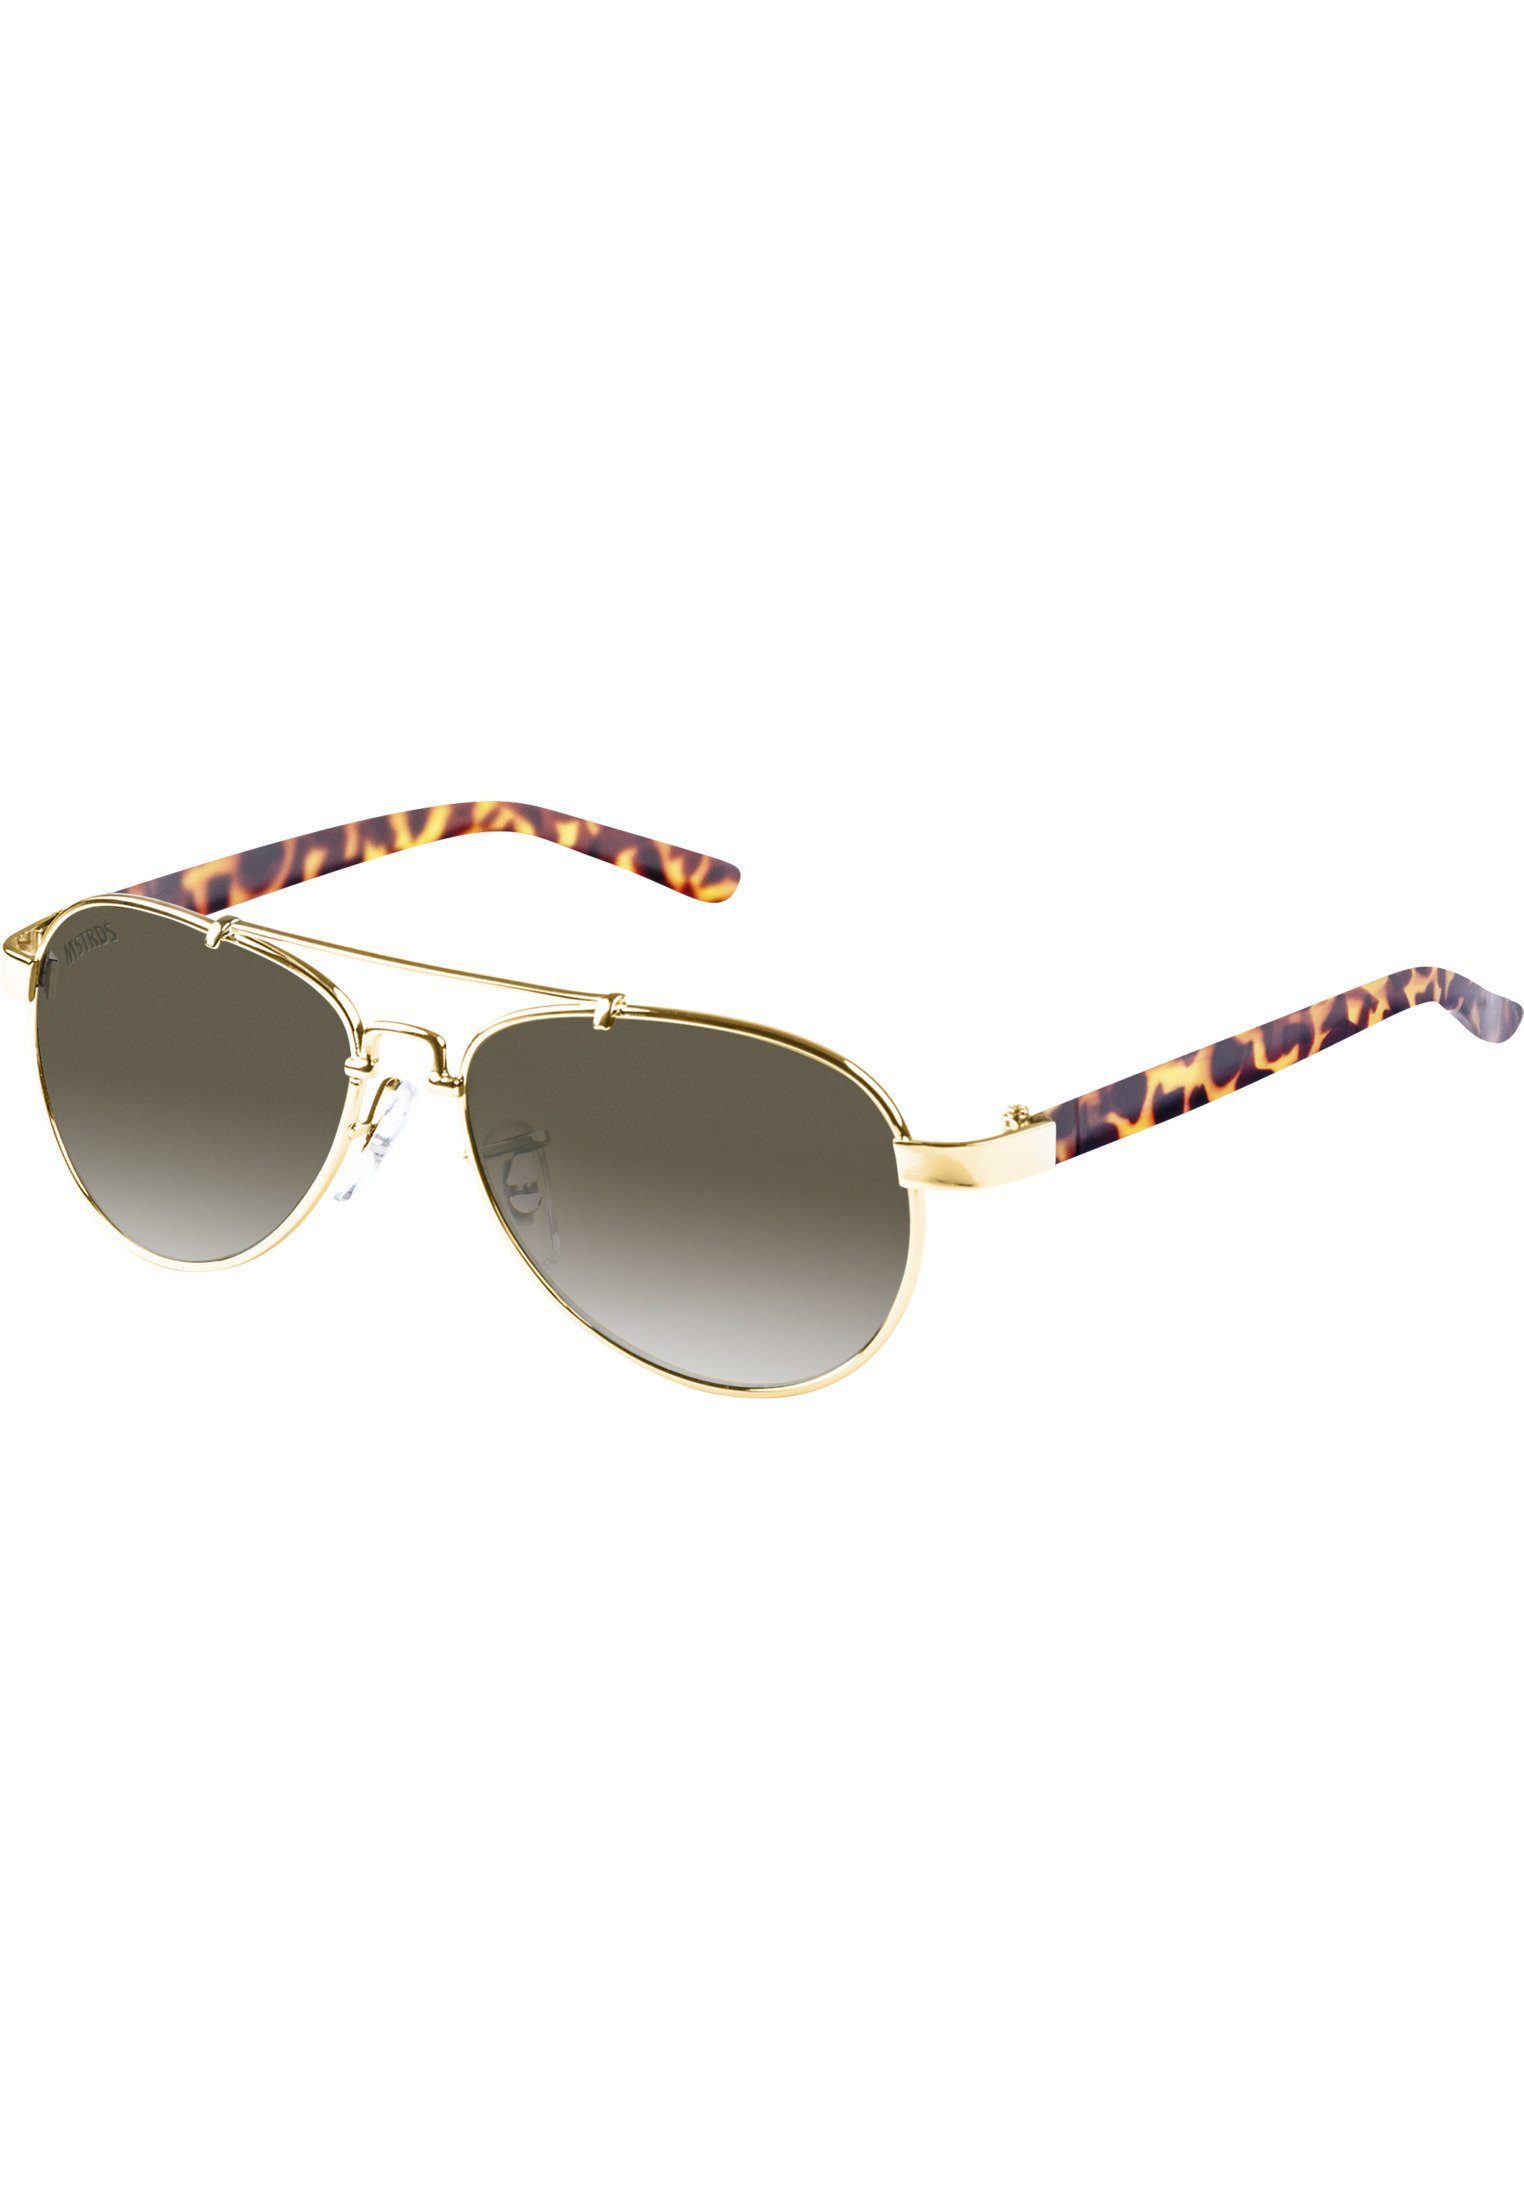 MSTRDS Sonnenbrille Accessoires Mumbo gold/brown Youth